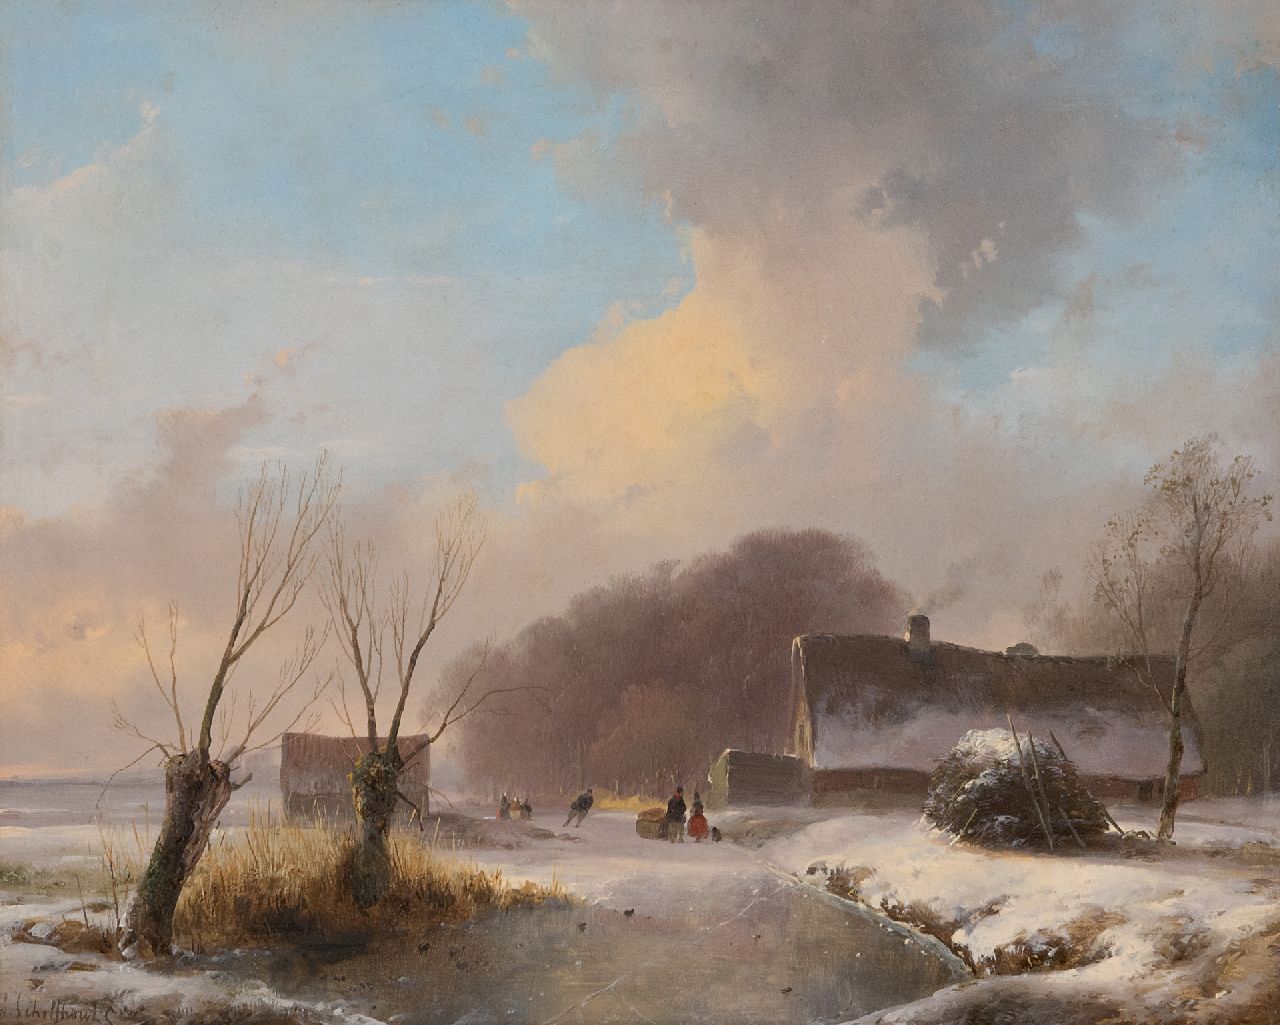 Schelfhout A.  | Andreas Schelfhout, Winter scene with approaching snowstorm, oil on panel 29.7 x 36.7 cm, signed l.l. and painted ca. 1833